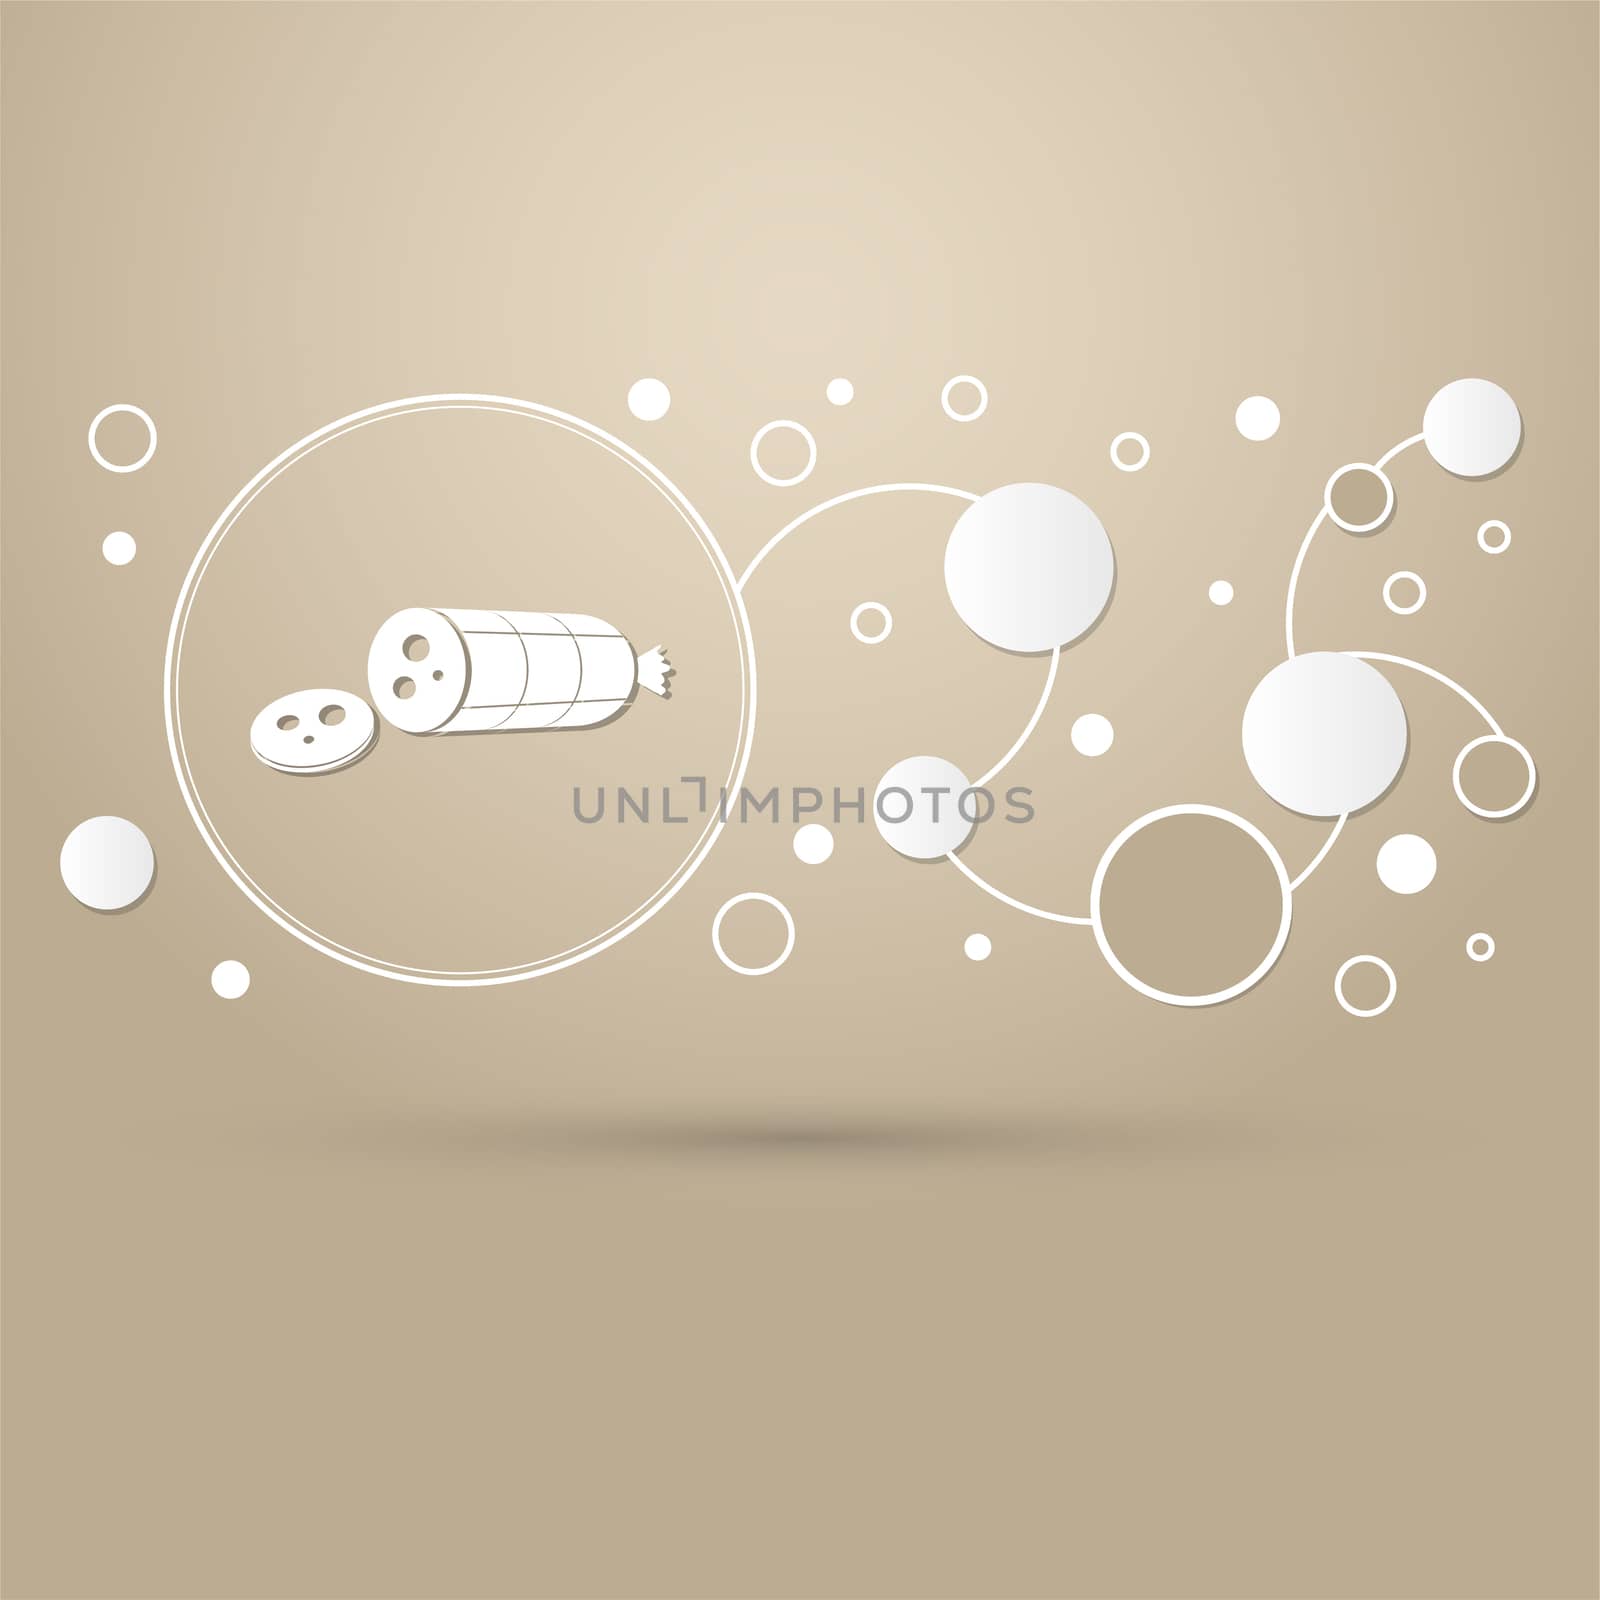 Smoked sausage sliced Icon on a brown background with elegant style and modern design infographic.  by Adamchuk